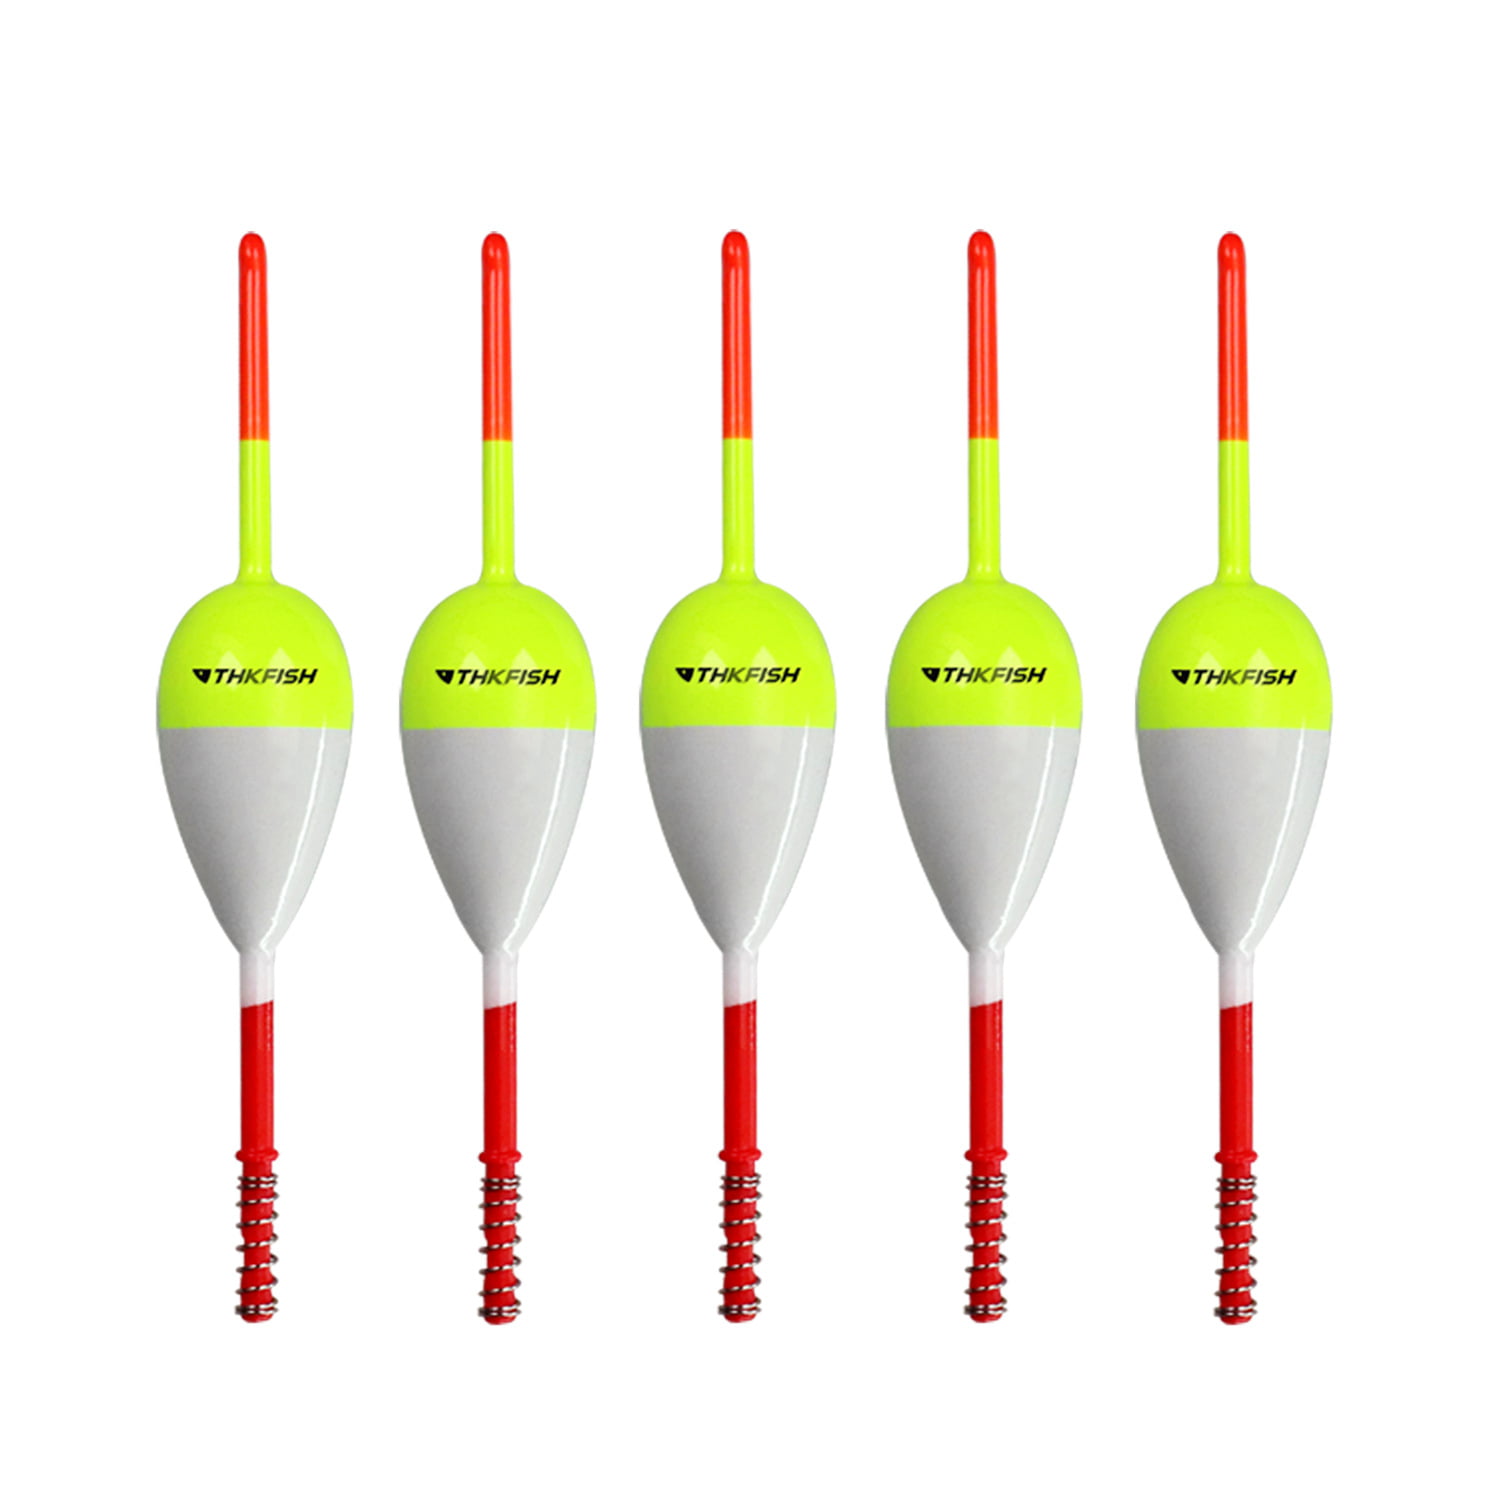 THKFISH Fishing Floats and Slip Bobbers for Balsa Crappie Floatage 3/8 Oz.  3.84 In. x 0.6 In. x 7.2 In., 5 Pieces